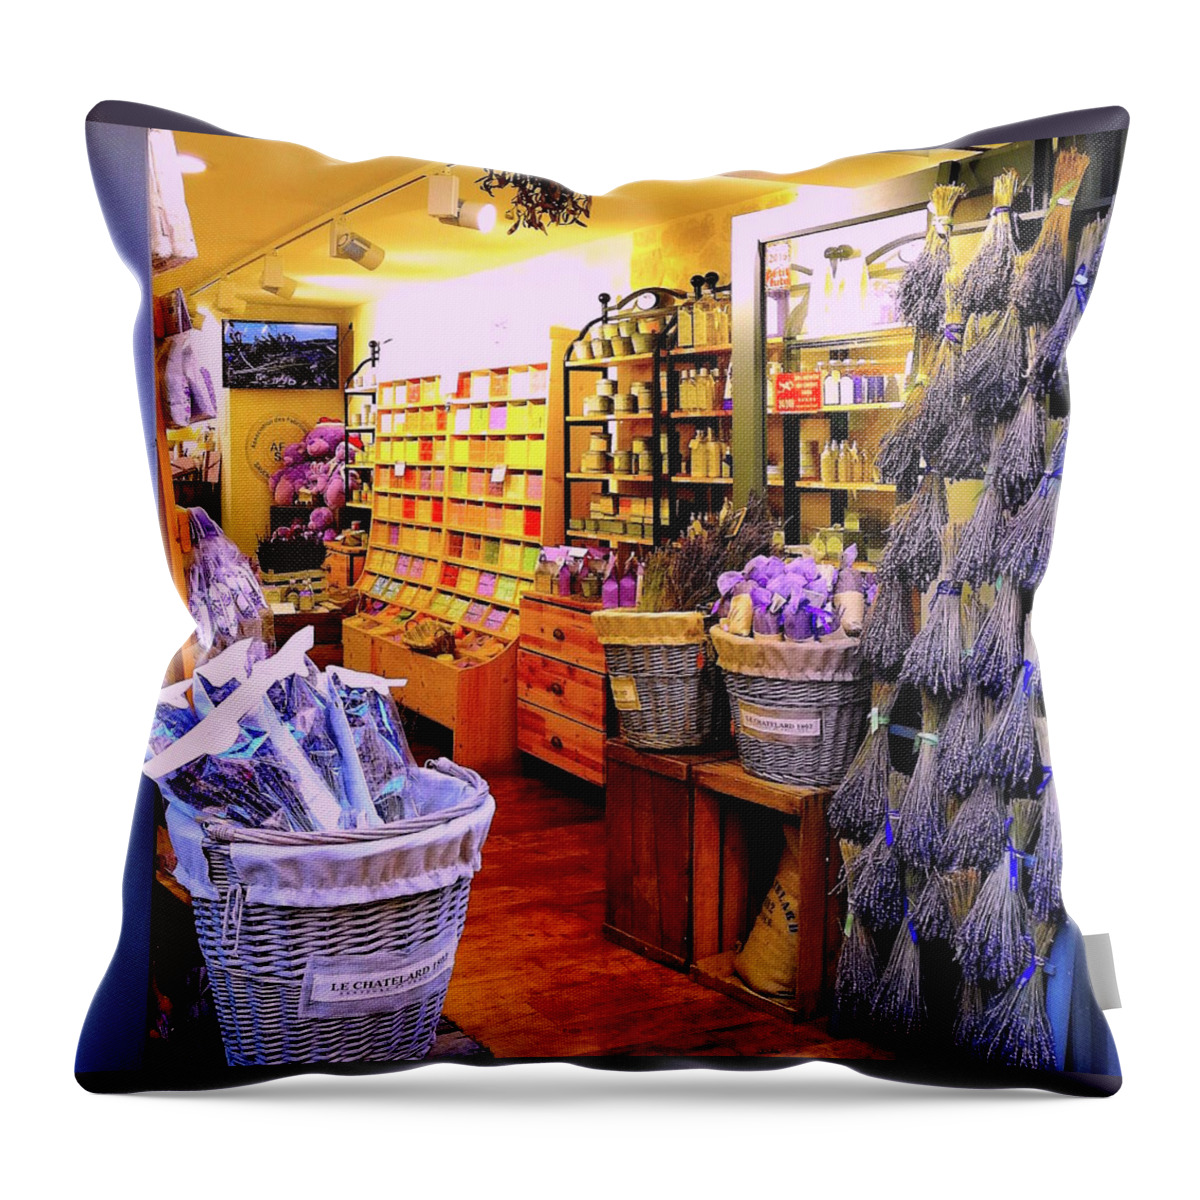 Lavenderprint Throw Pillow featuring the photograph Lavender Shop in Southern France by Monique Wegmueller